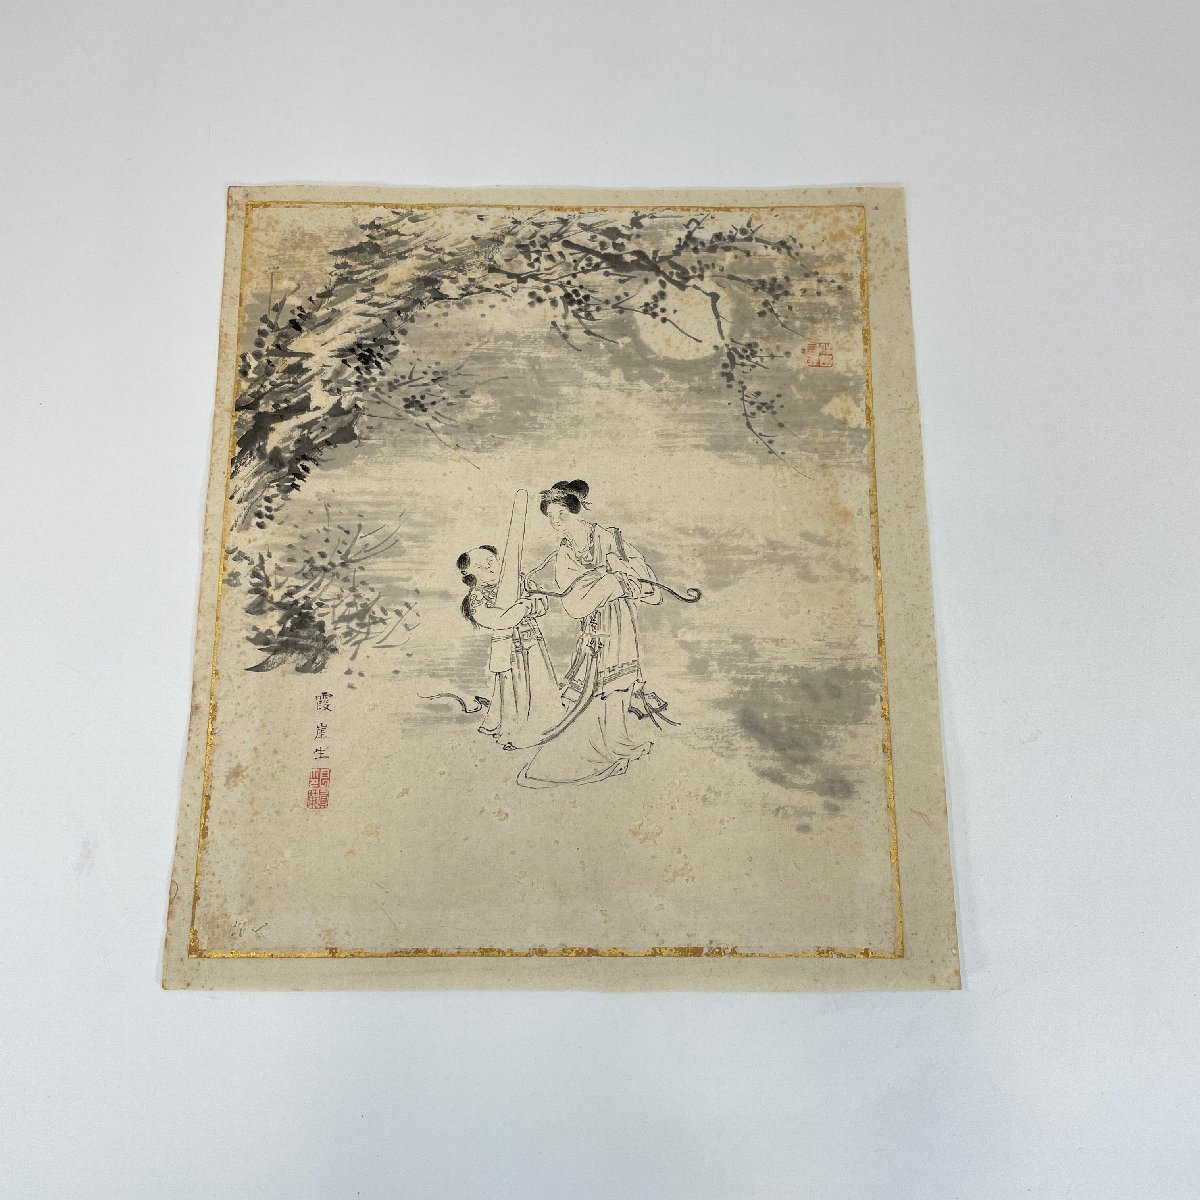 ER-60 [Kasumigai] Chinese style angel figure painting, hand-painted, old book, antique, signature, artist's work, Painting, Japanese painting, person, Bodhisattva